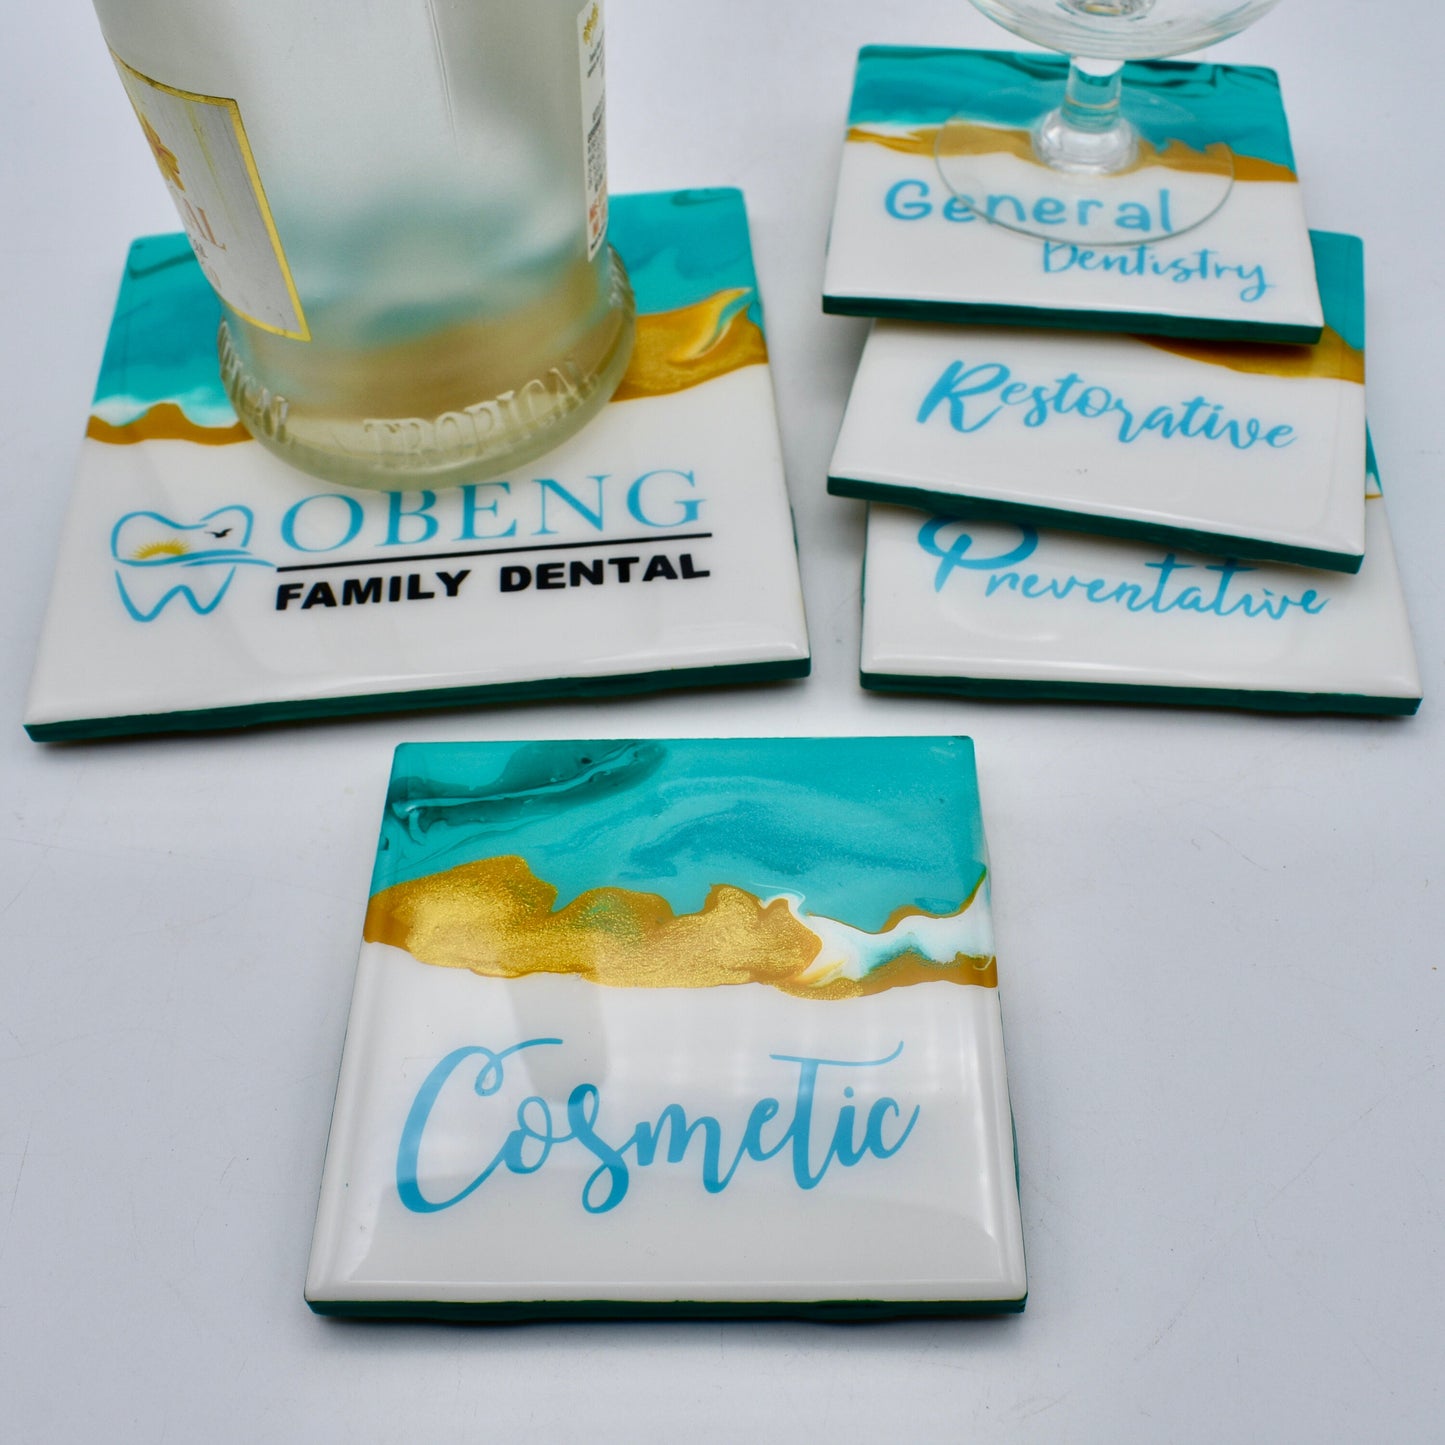 Personalized Corporate Gifts - Corporate Gift Coasters - Custom Corporate Gift – Branded Corporate Gifts - Home/Office Drink Coasters